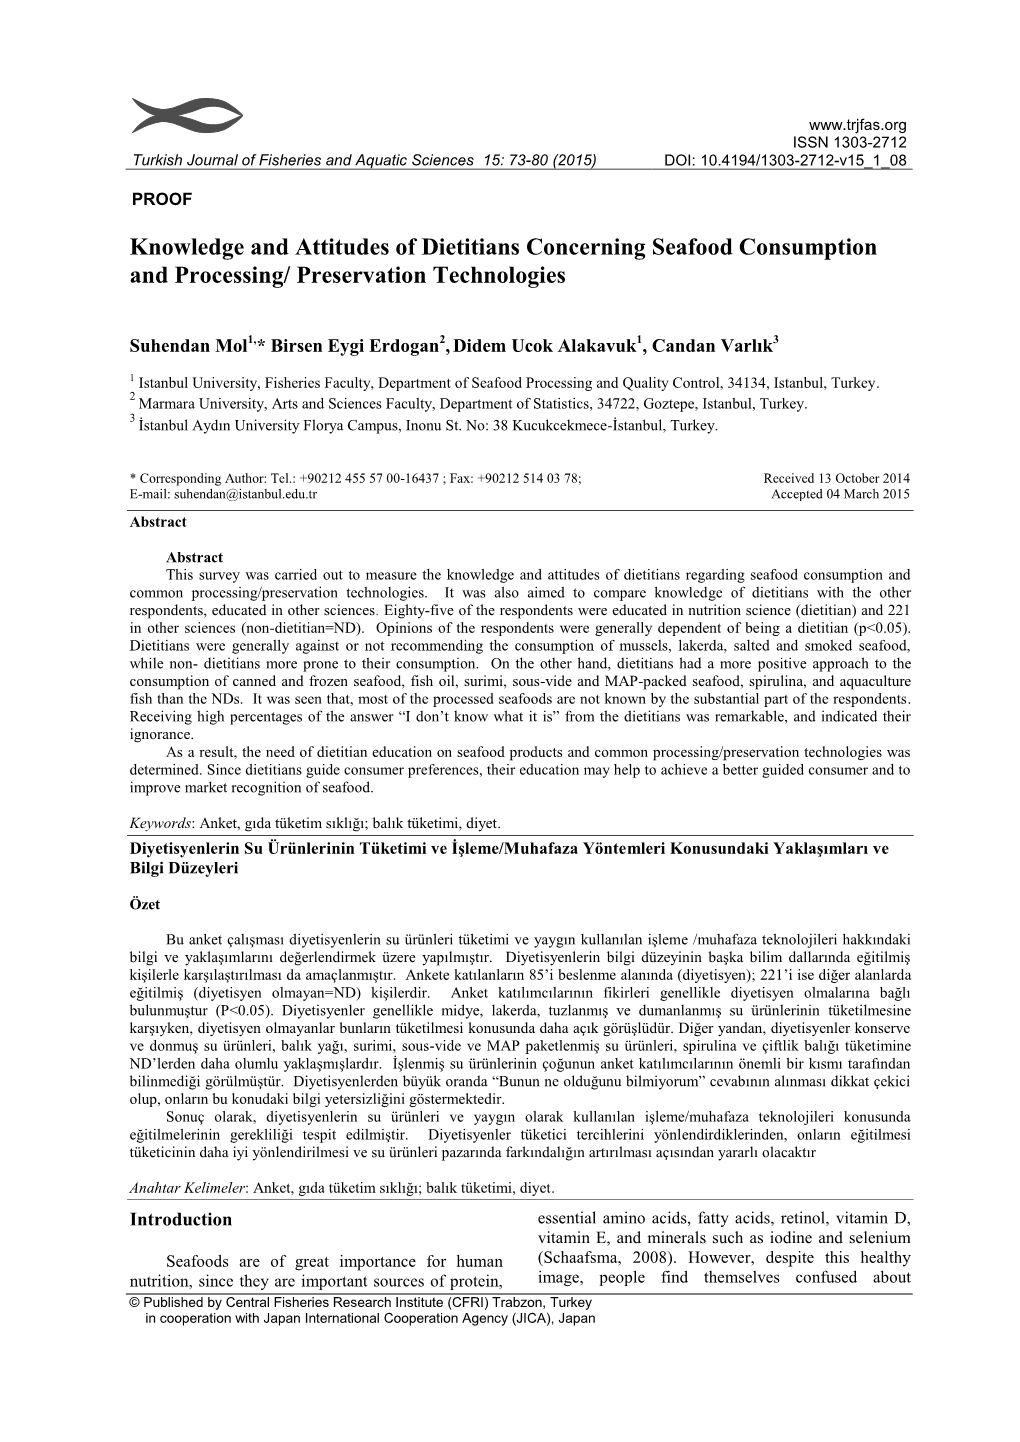 Knowledge and Attitudes of Dietitians Concerning Seafood Consumption and Processing/ Preservation Technologies